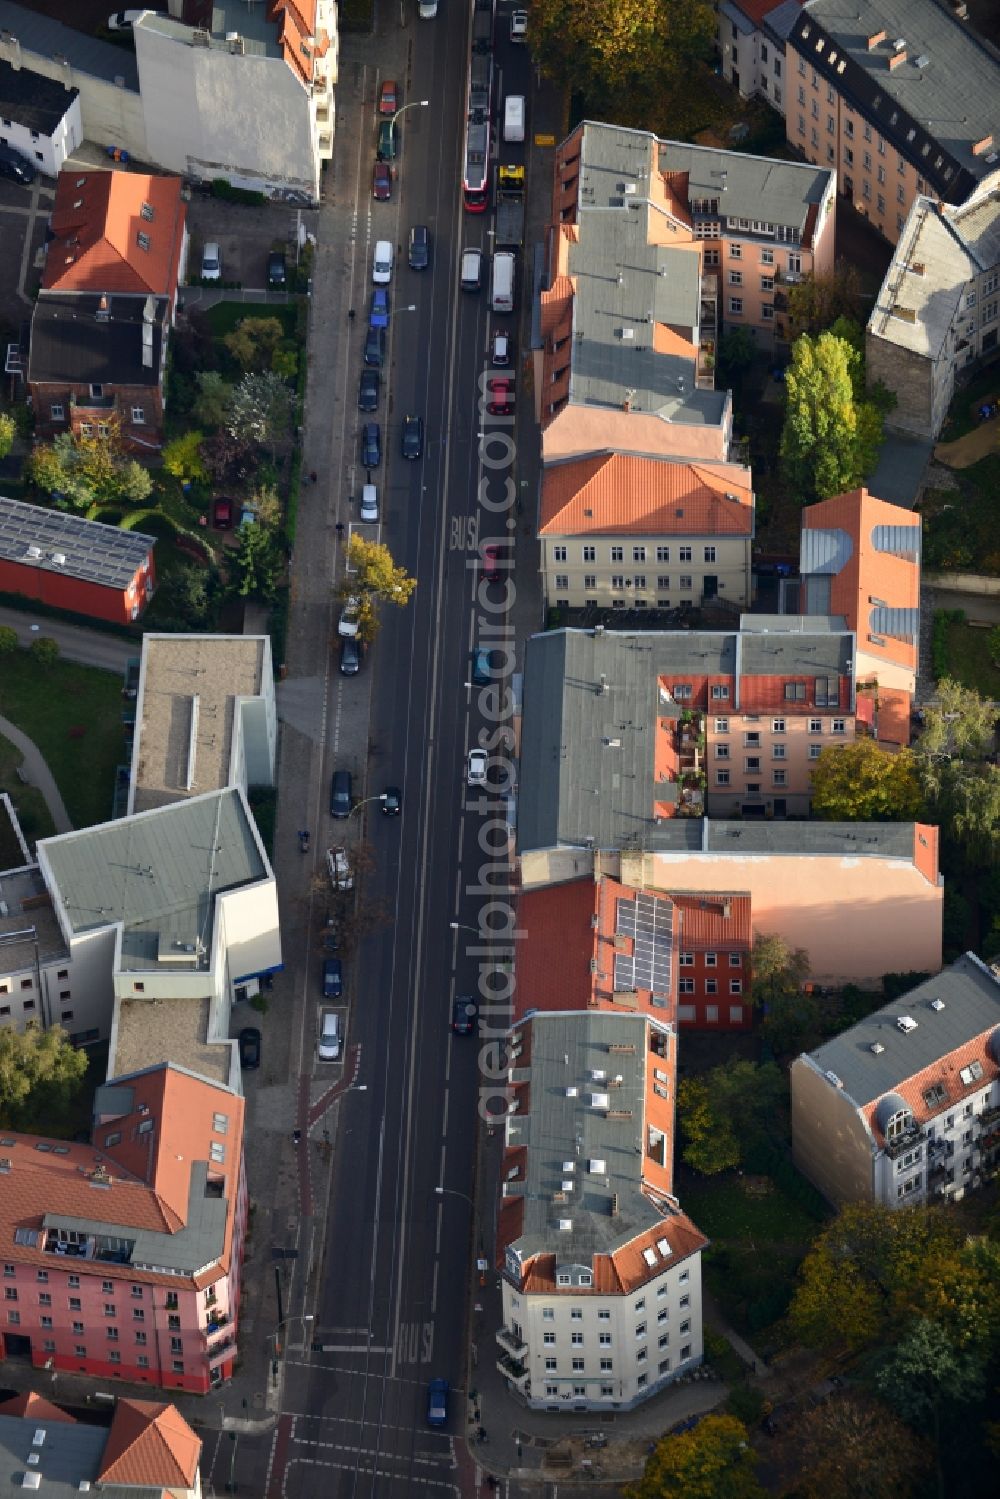 Berlin Pankow from the bird's eye view: Roof landscape of the old building - residential areas along the road Schoenholzer and Wilhelm-Kuhr- street in the Pankow district of Berlin